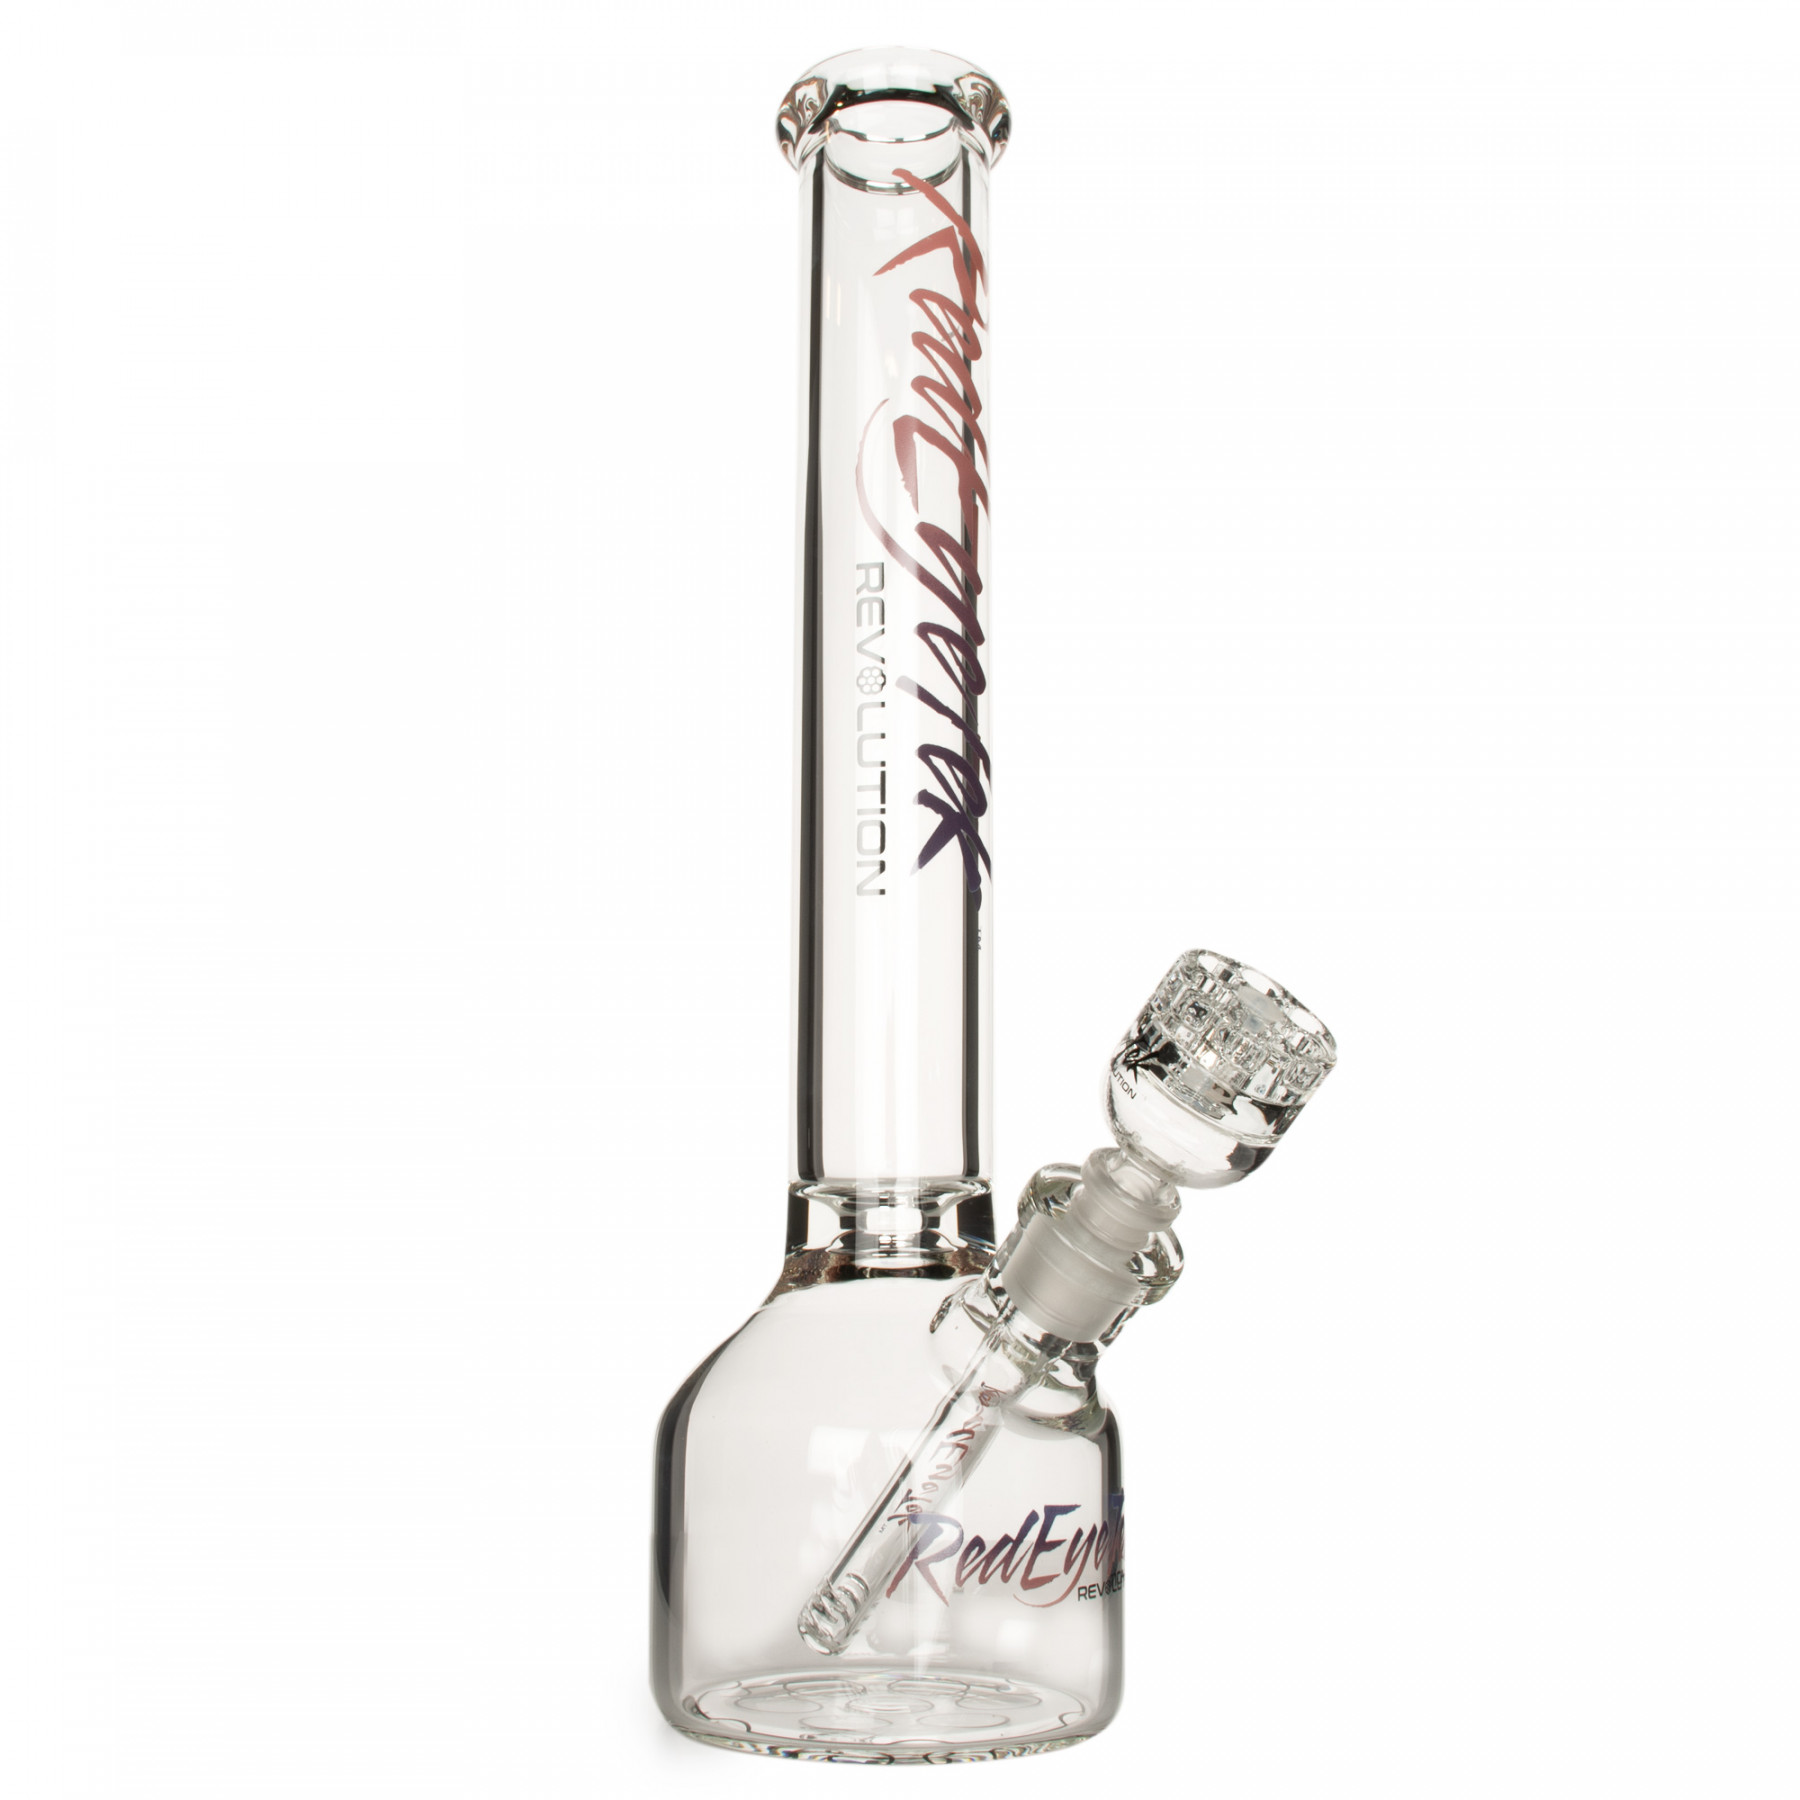 17" 7mm Thick Revolution Canteen Base Water Pipe